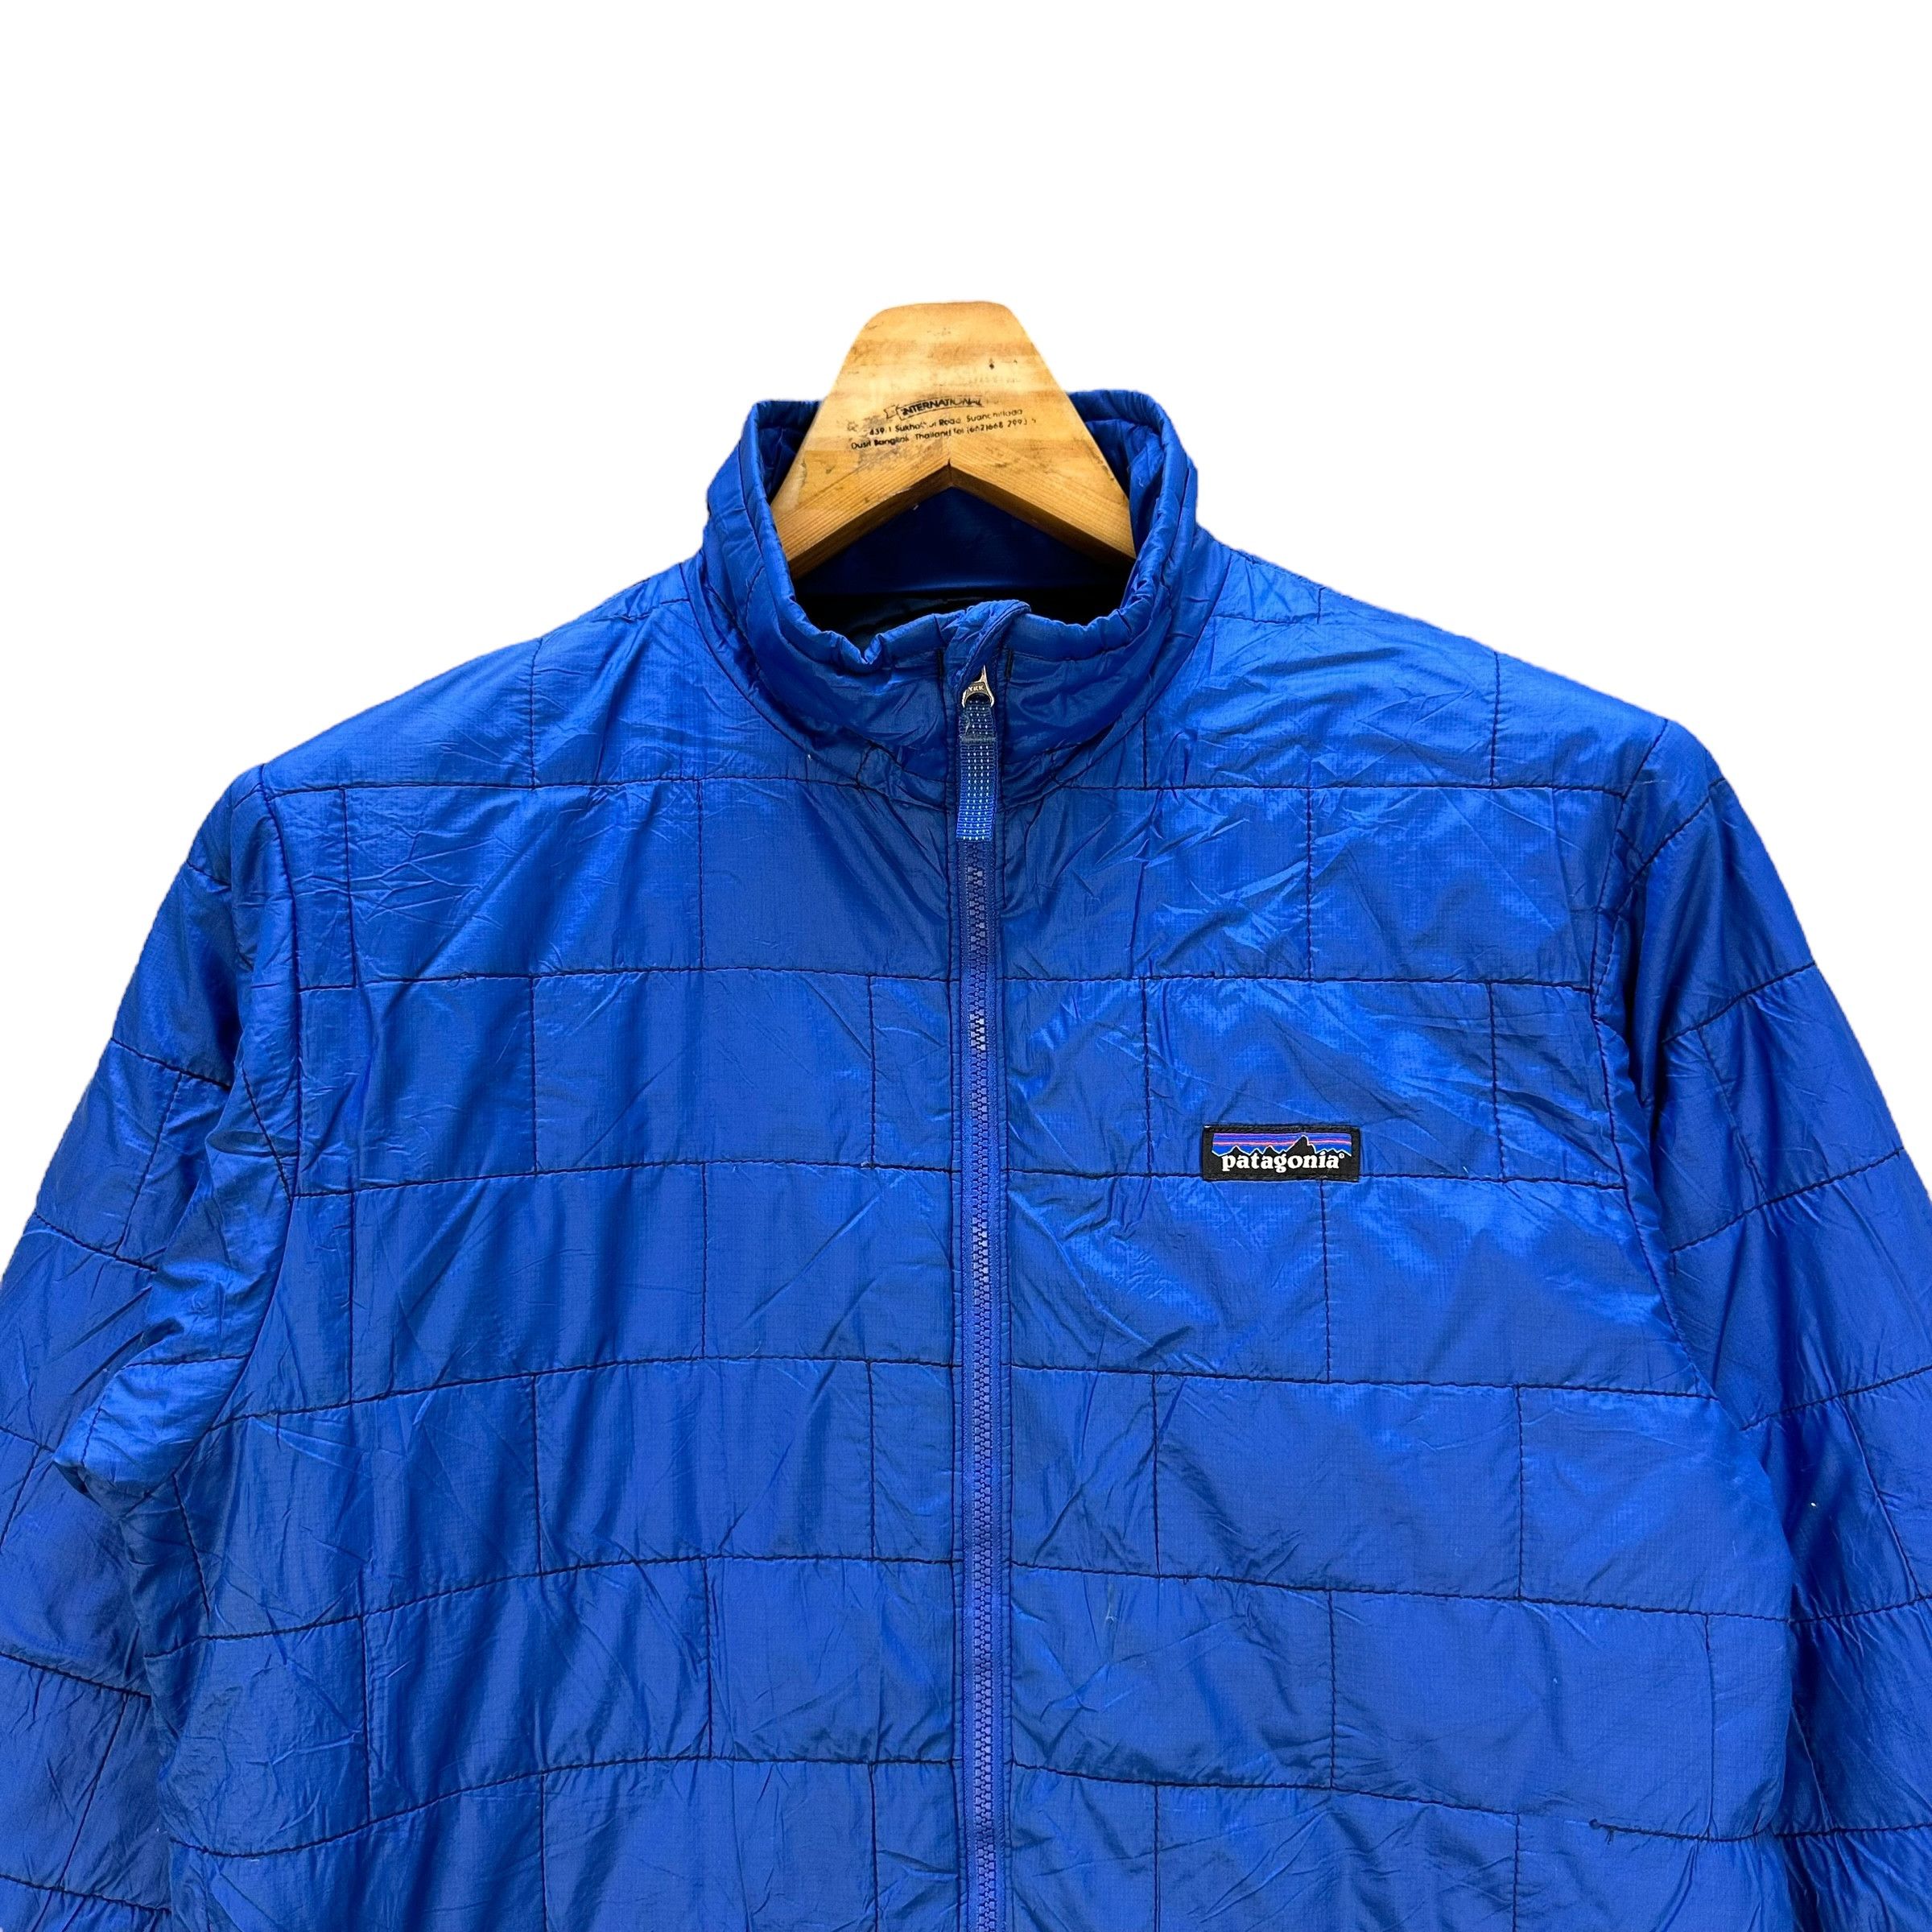 PATAGONIA LIGHT PUFFER JACKET IN BLUE FOR KIDS #9020-48 - 2